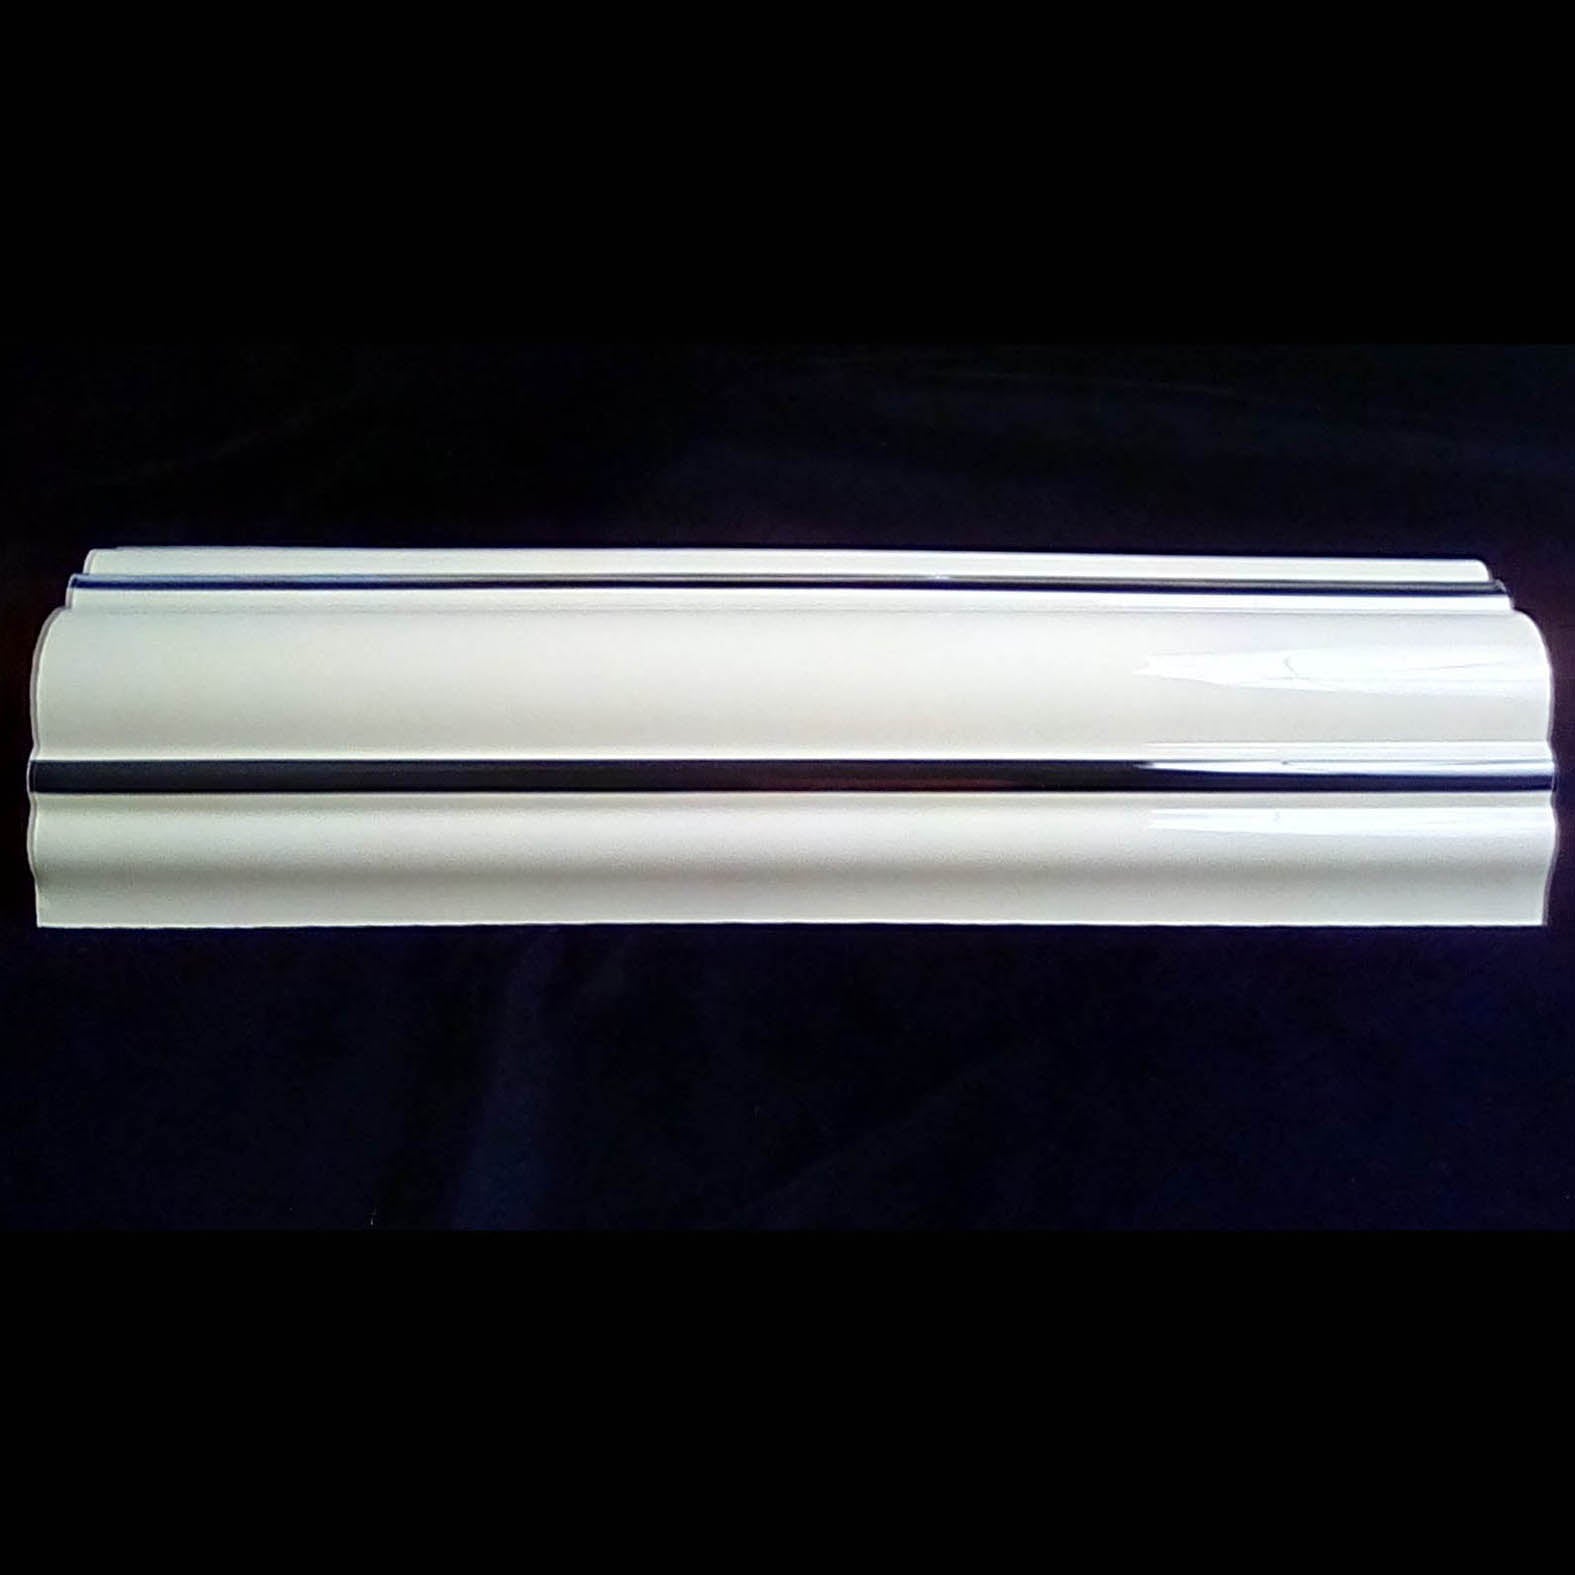 Rock-Ola Jukebox Outer Pilaster Cream Plastic Straight 24" (57386-01-LF) **CURRENTLY 4-8 WEEK LEAD TIME**